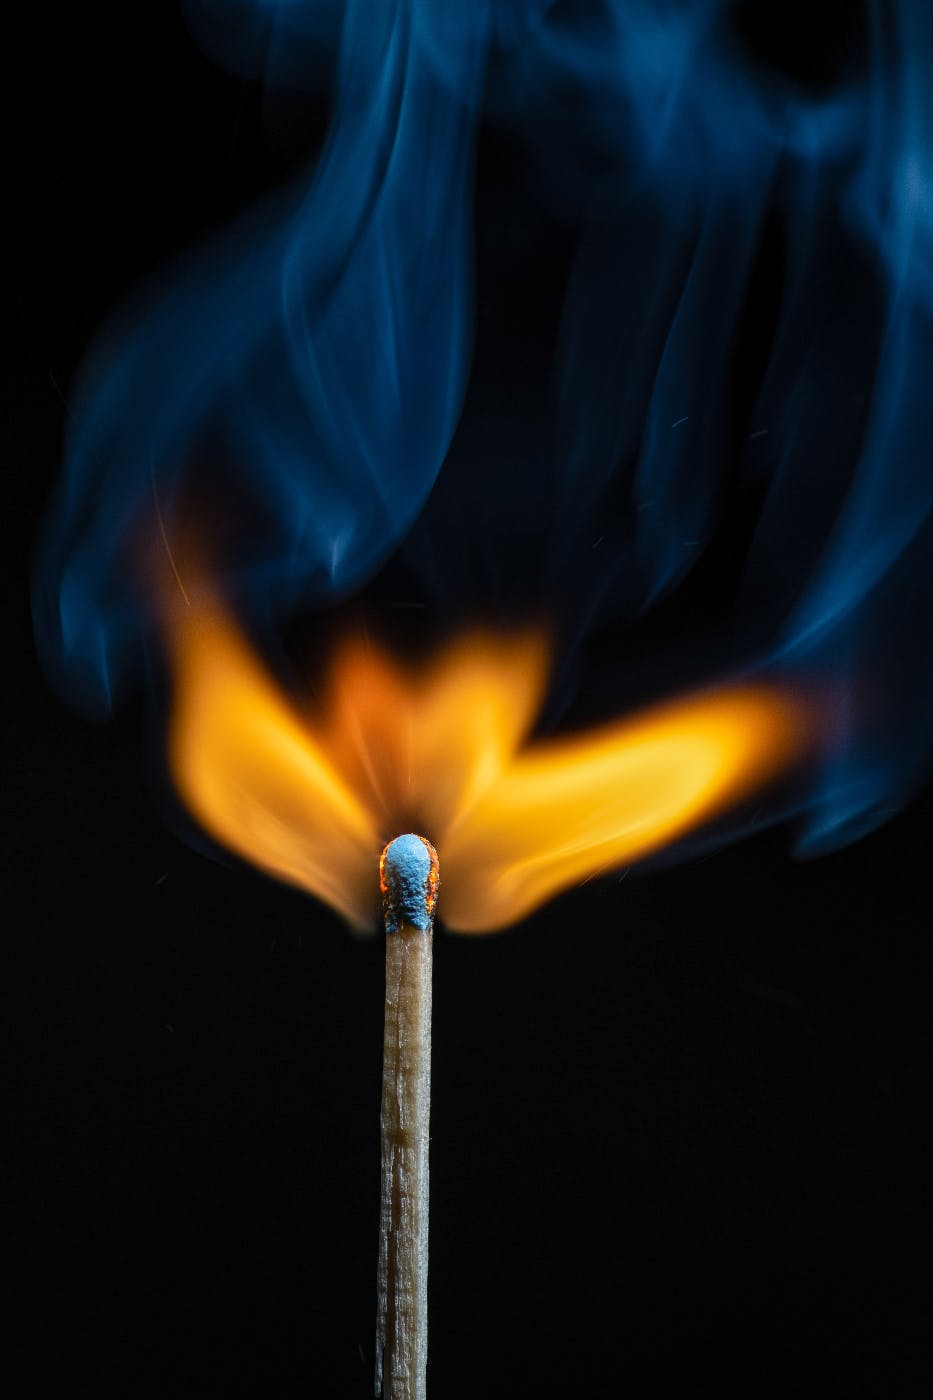 A lit match with yellow and blue flame